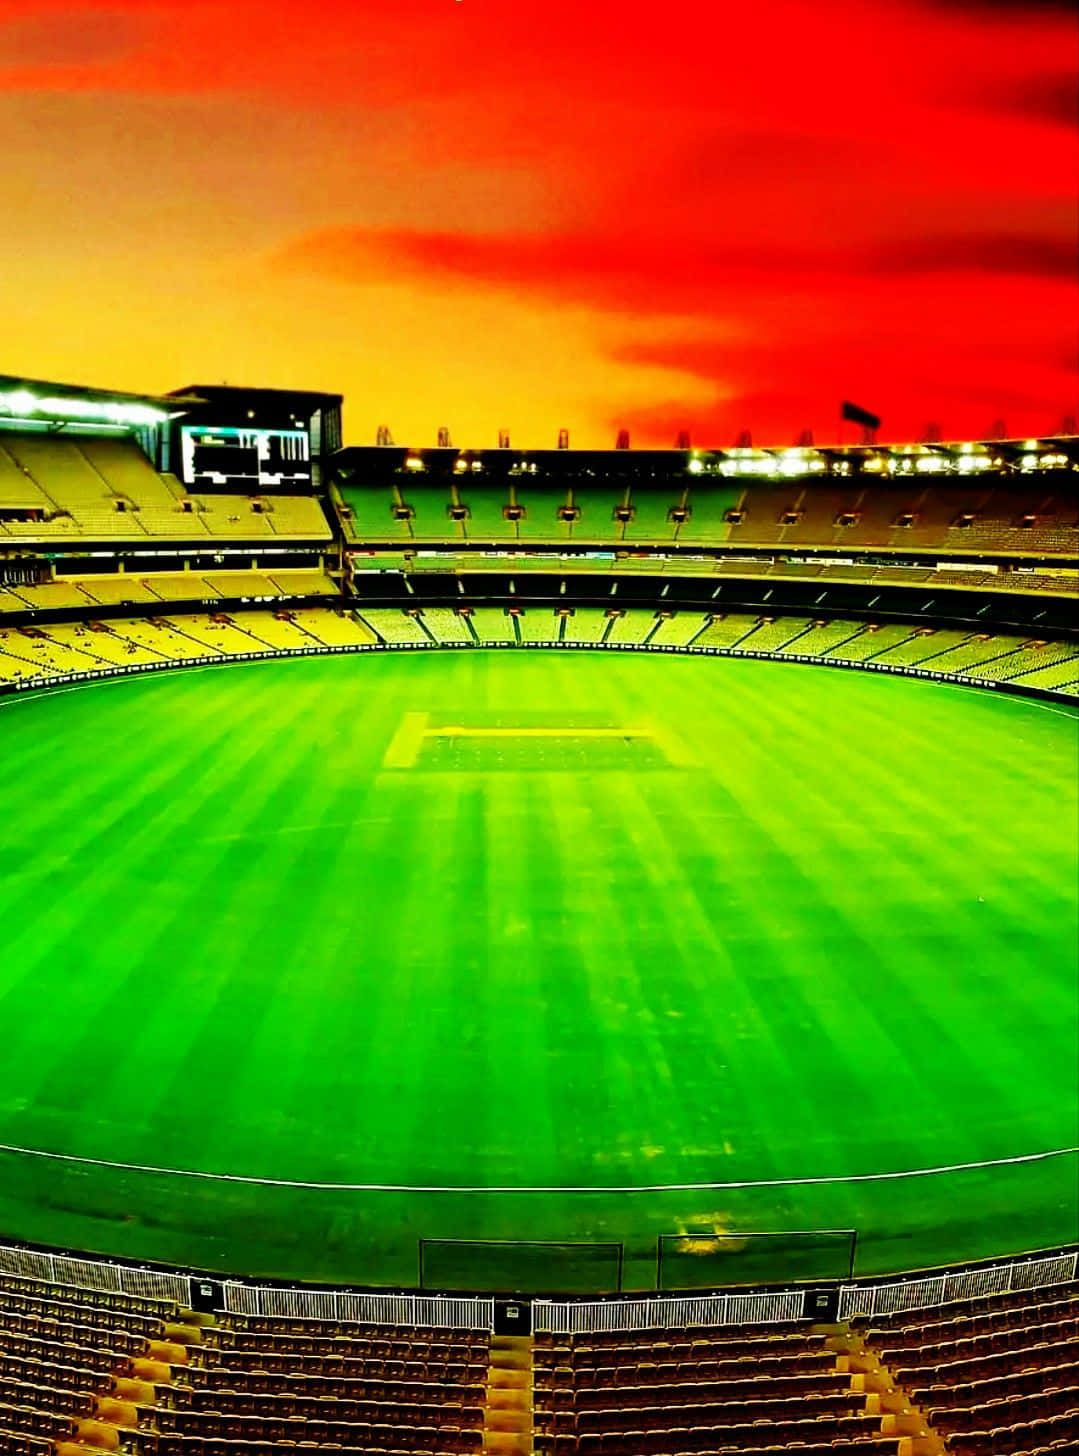 Get ready for some thrilling cricket matches at the cricket ground!